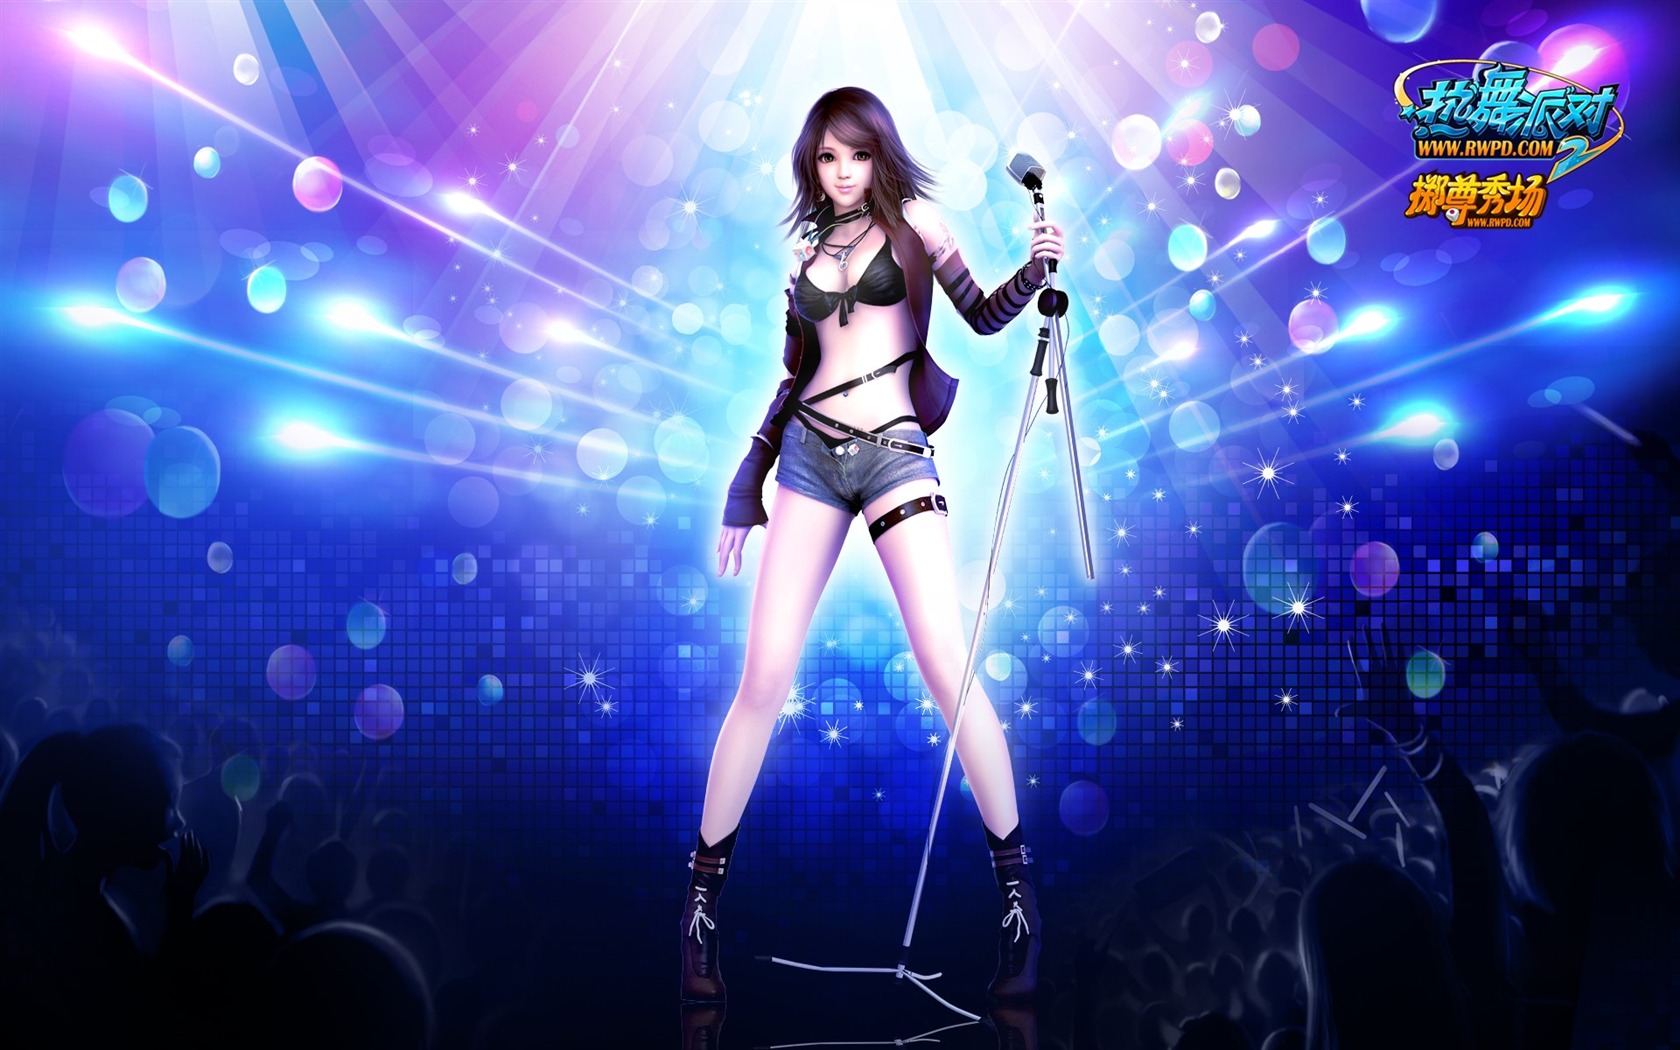 Online game Hot Dance Party II official wallpapers #39 - 1680x1050